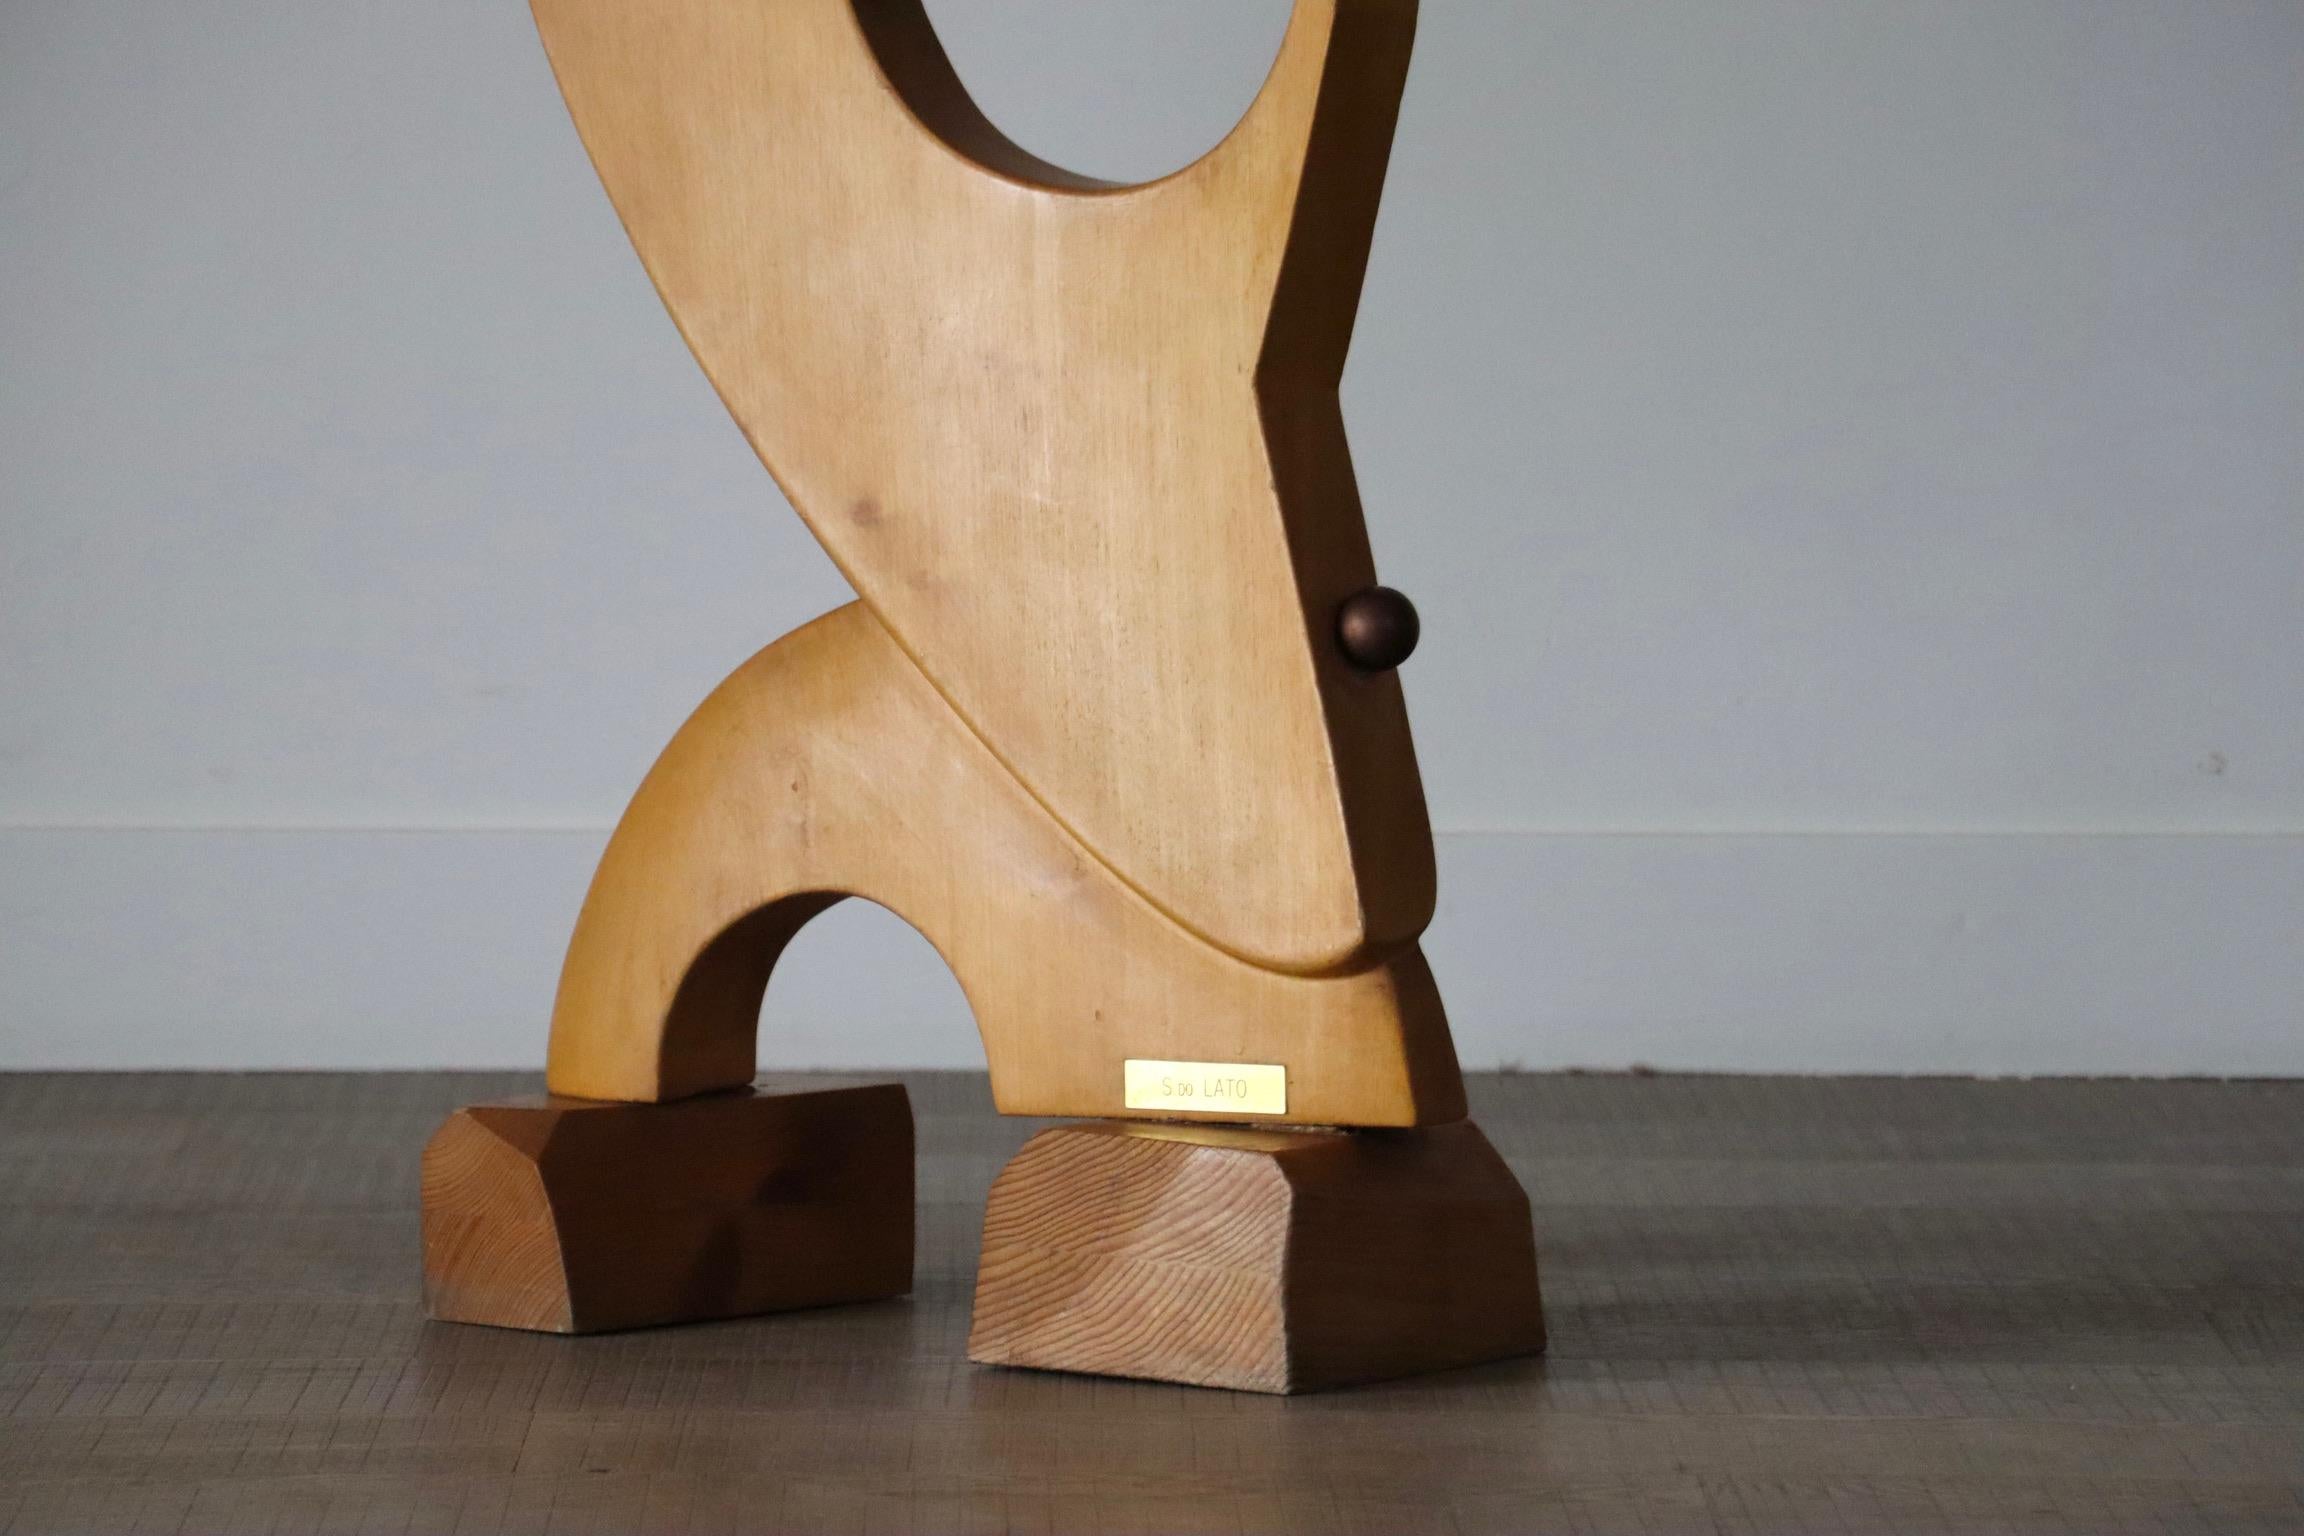 Large Abstract Wooden And Brass Sculpture By S. Do Lato, Italy 1970s For Sale 3